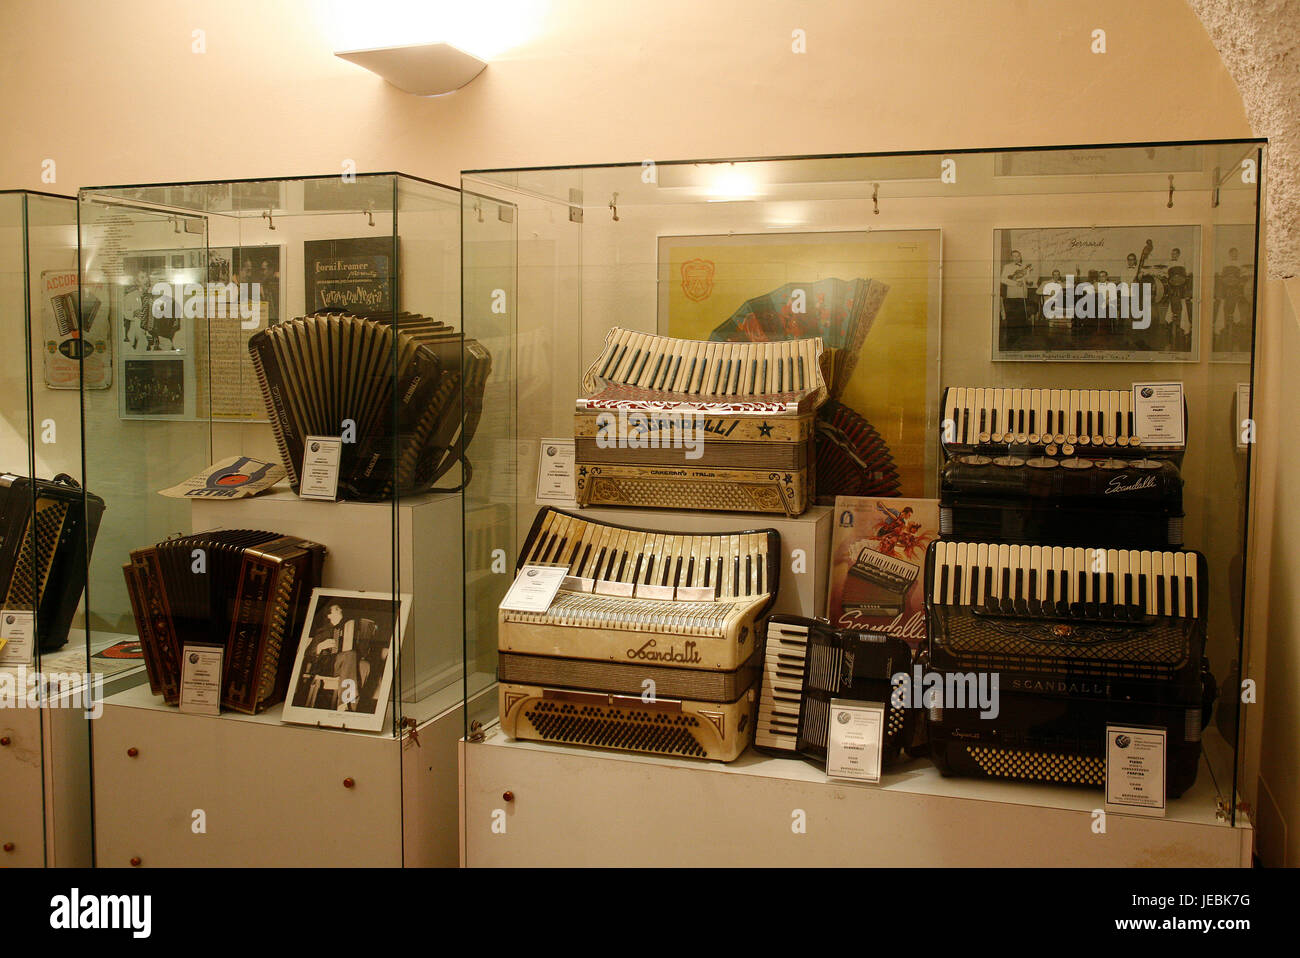 Italy Marche Castelfidardo (AN): Civic International Museum of Accordion. Exposition of ancient accordions. Stock Photo